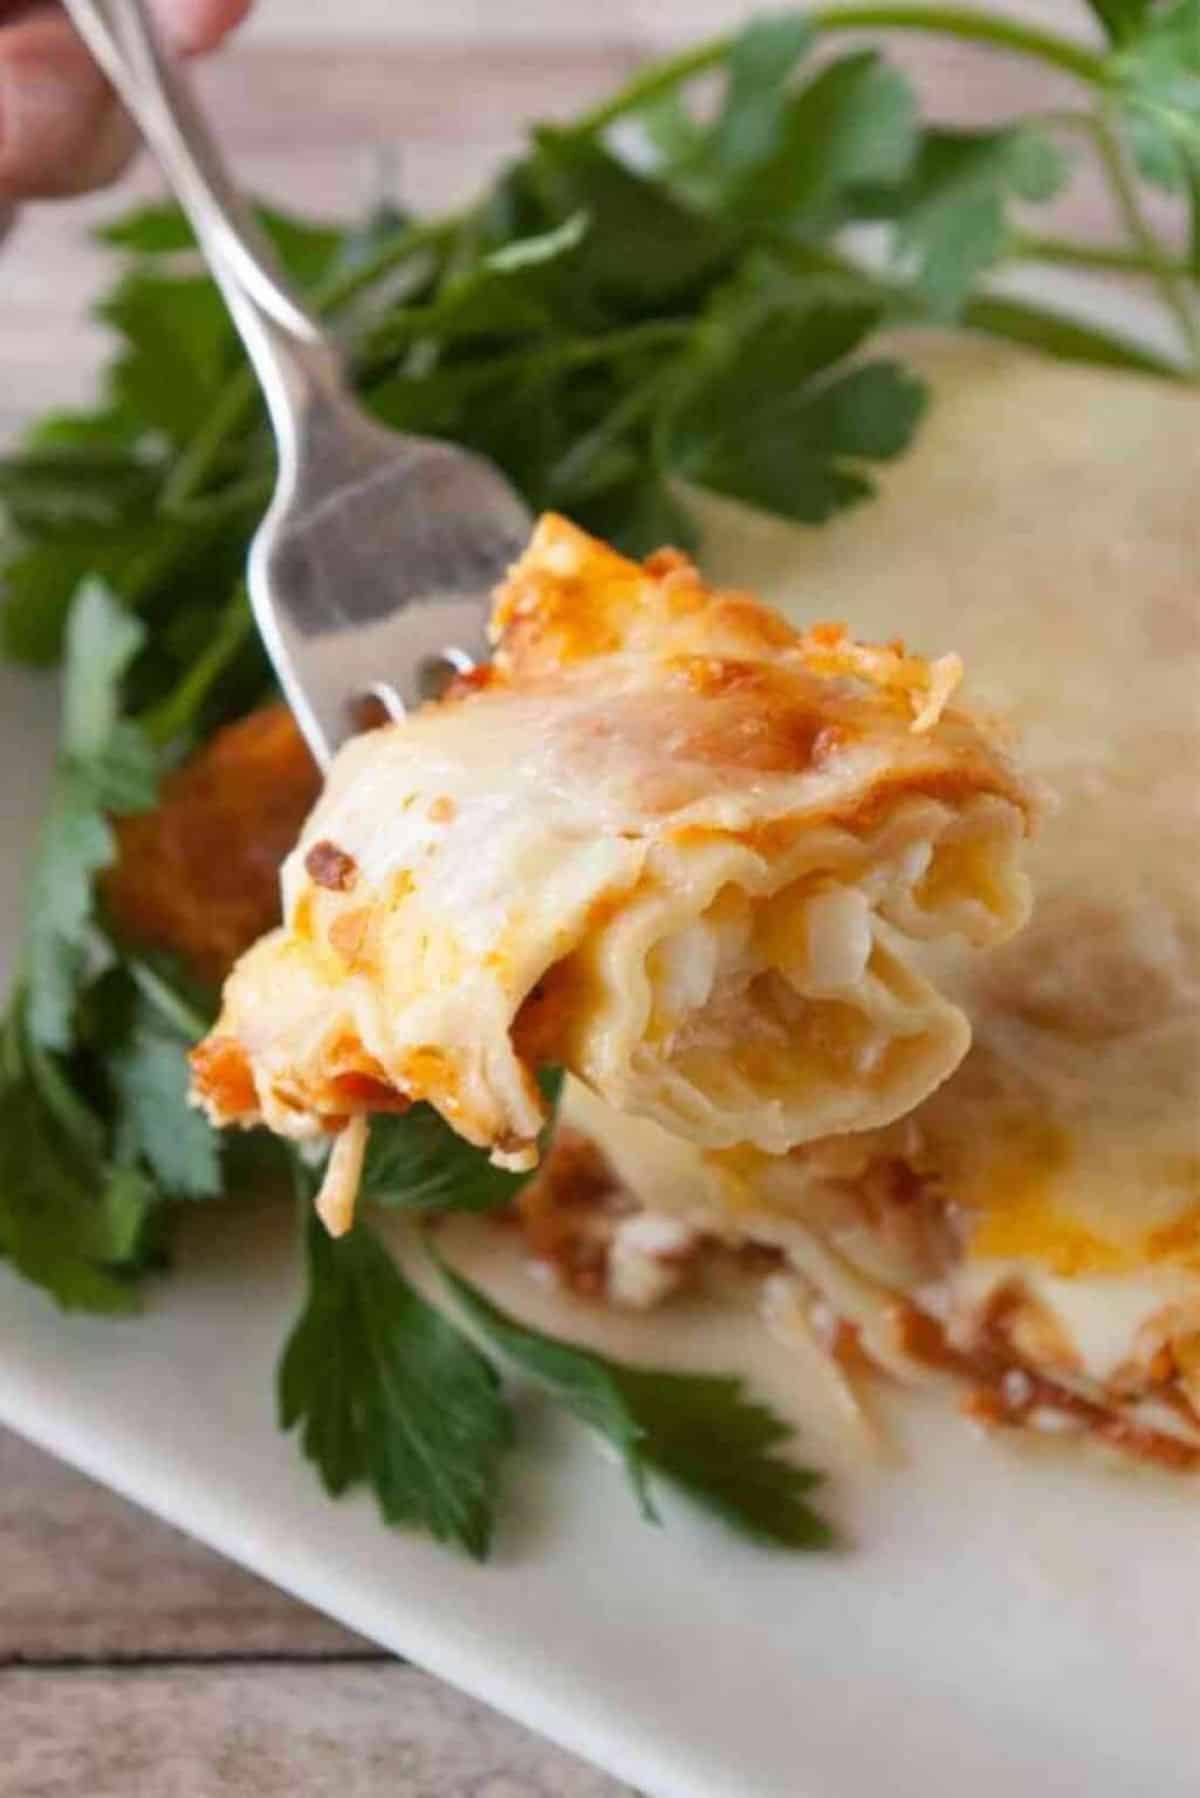 Deliicous Three Cheese Manicotti on a fork.